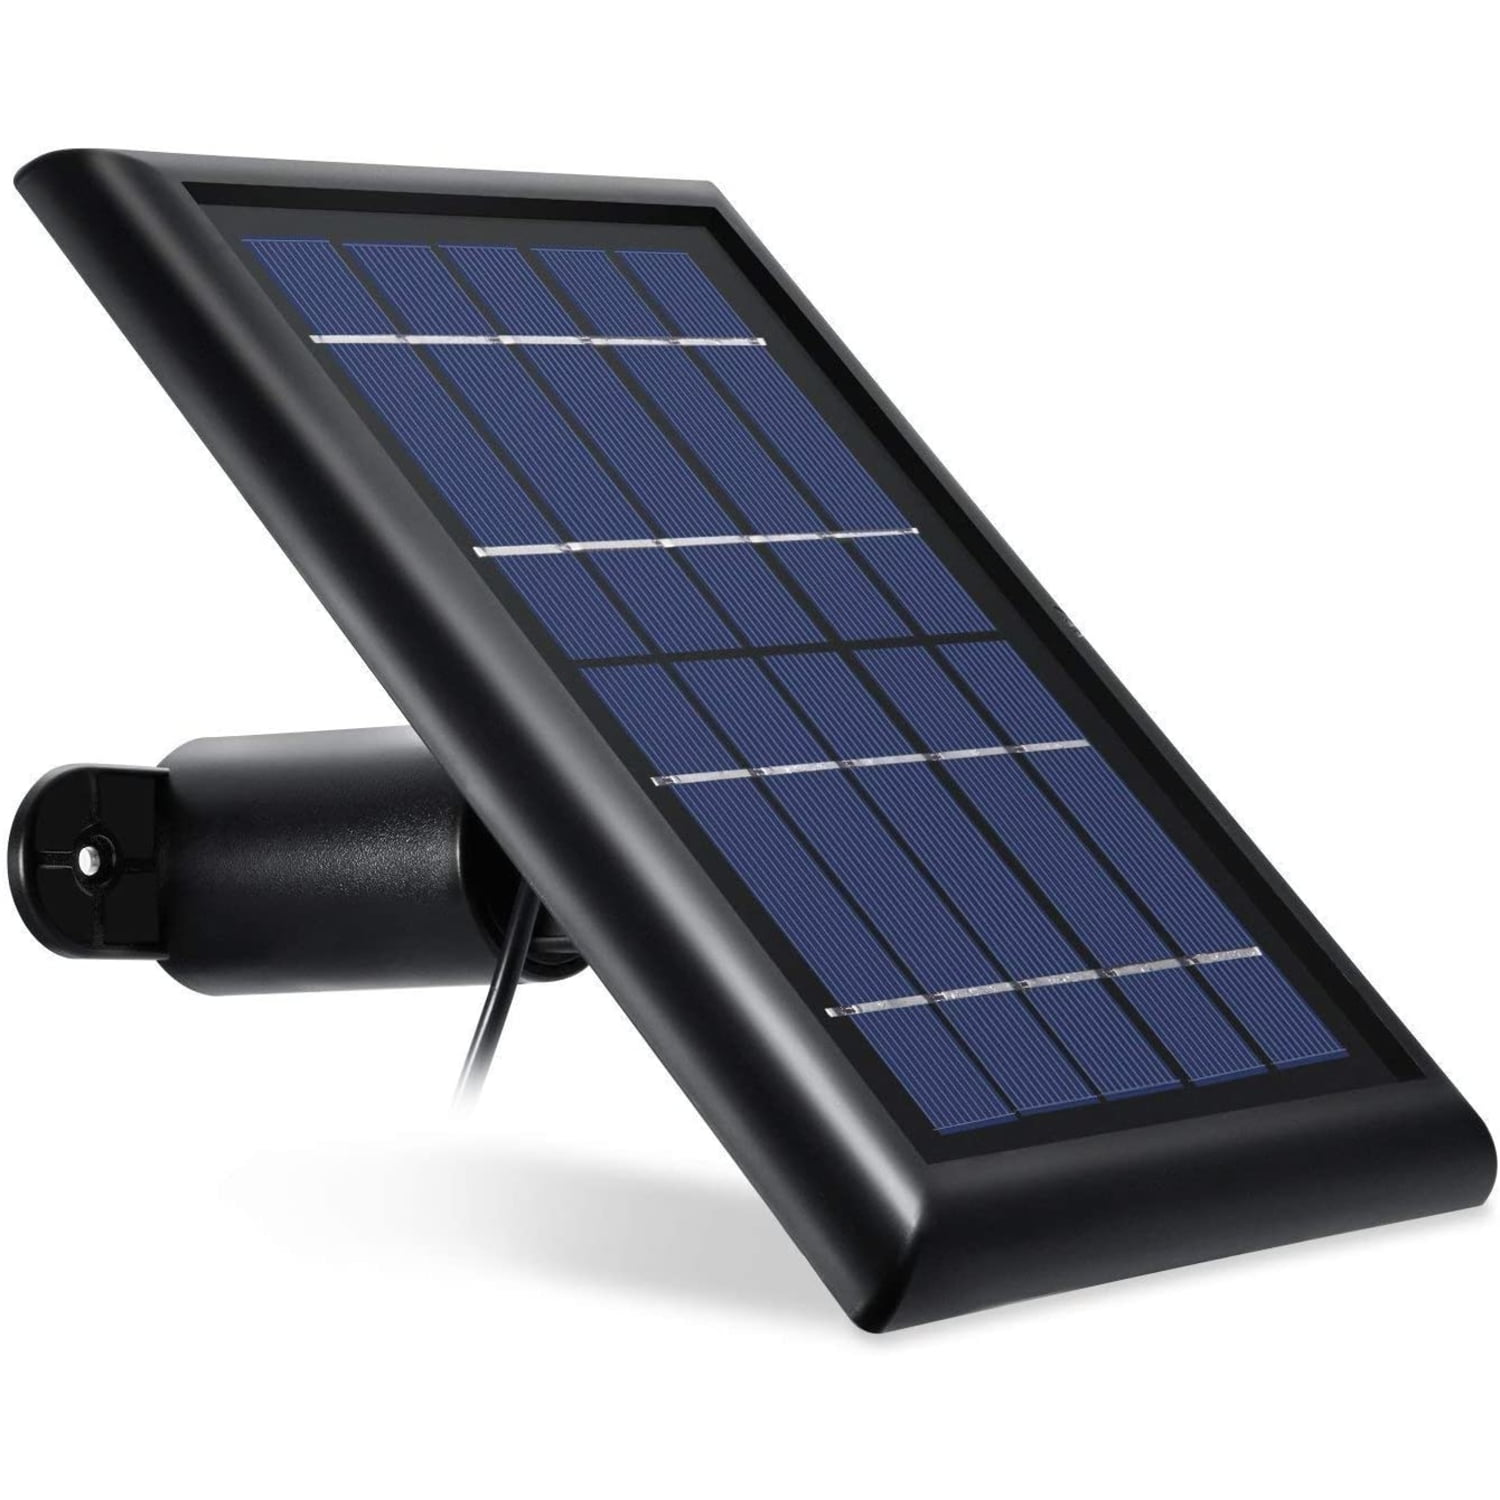 Wasserstein Solar Panel Compatible with Arlo Pro and Arlo Pro 2 Power Your Arlo Surveillance